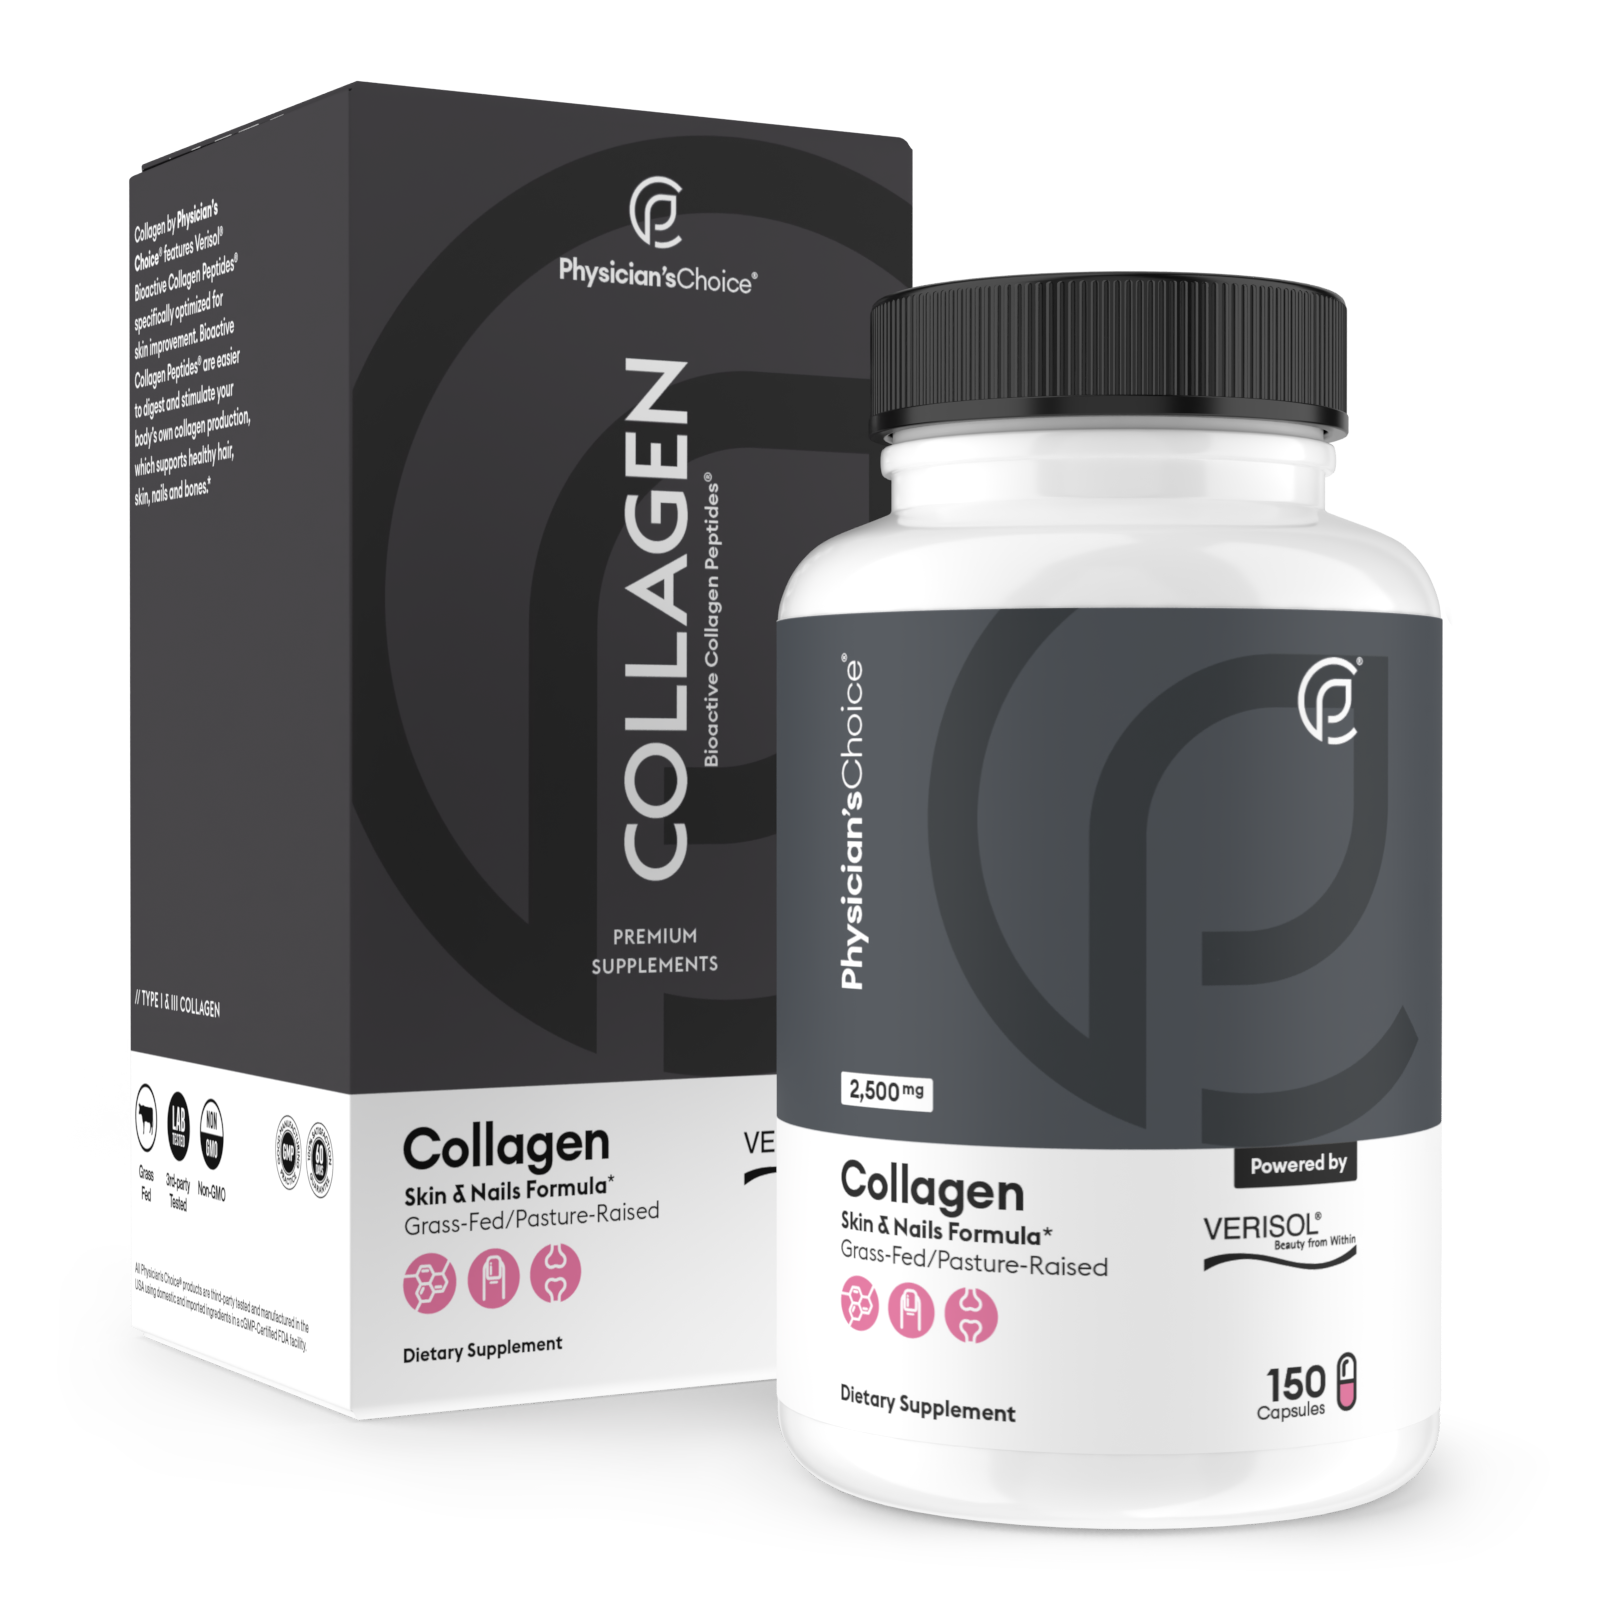 New Physician's Choice Collagen Verisol Bottle 150 capsules